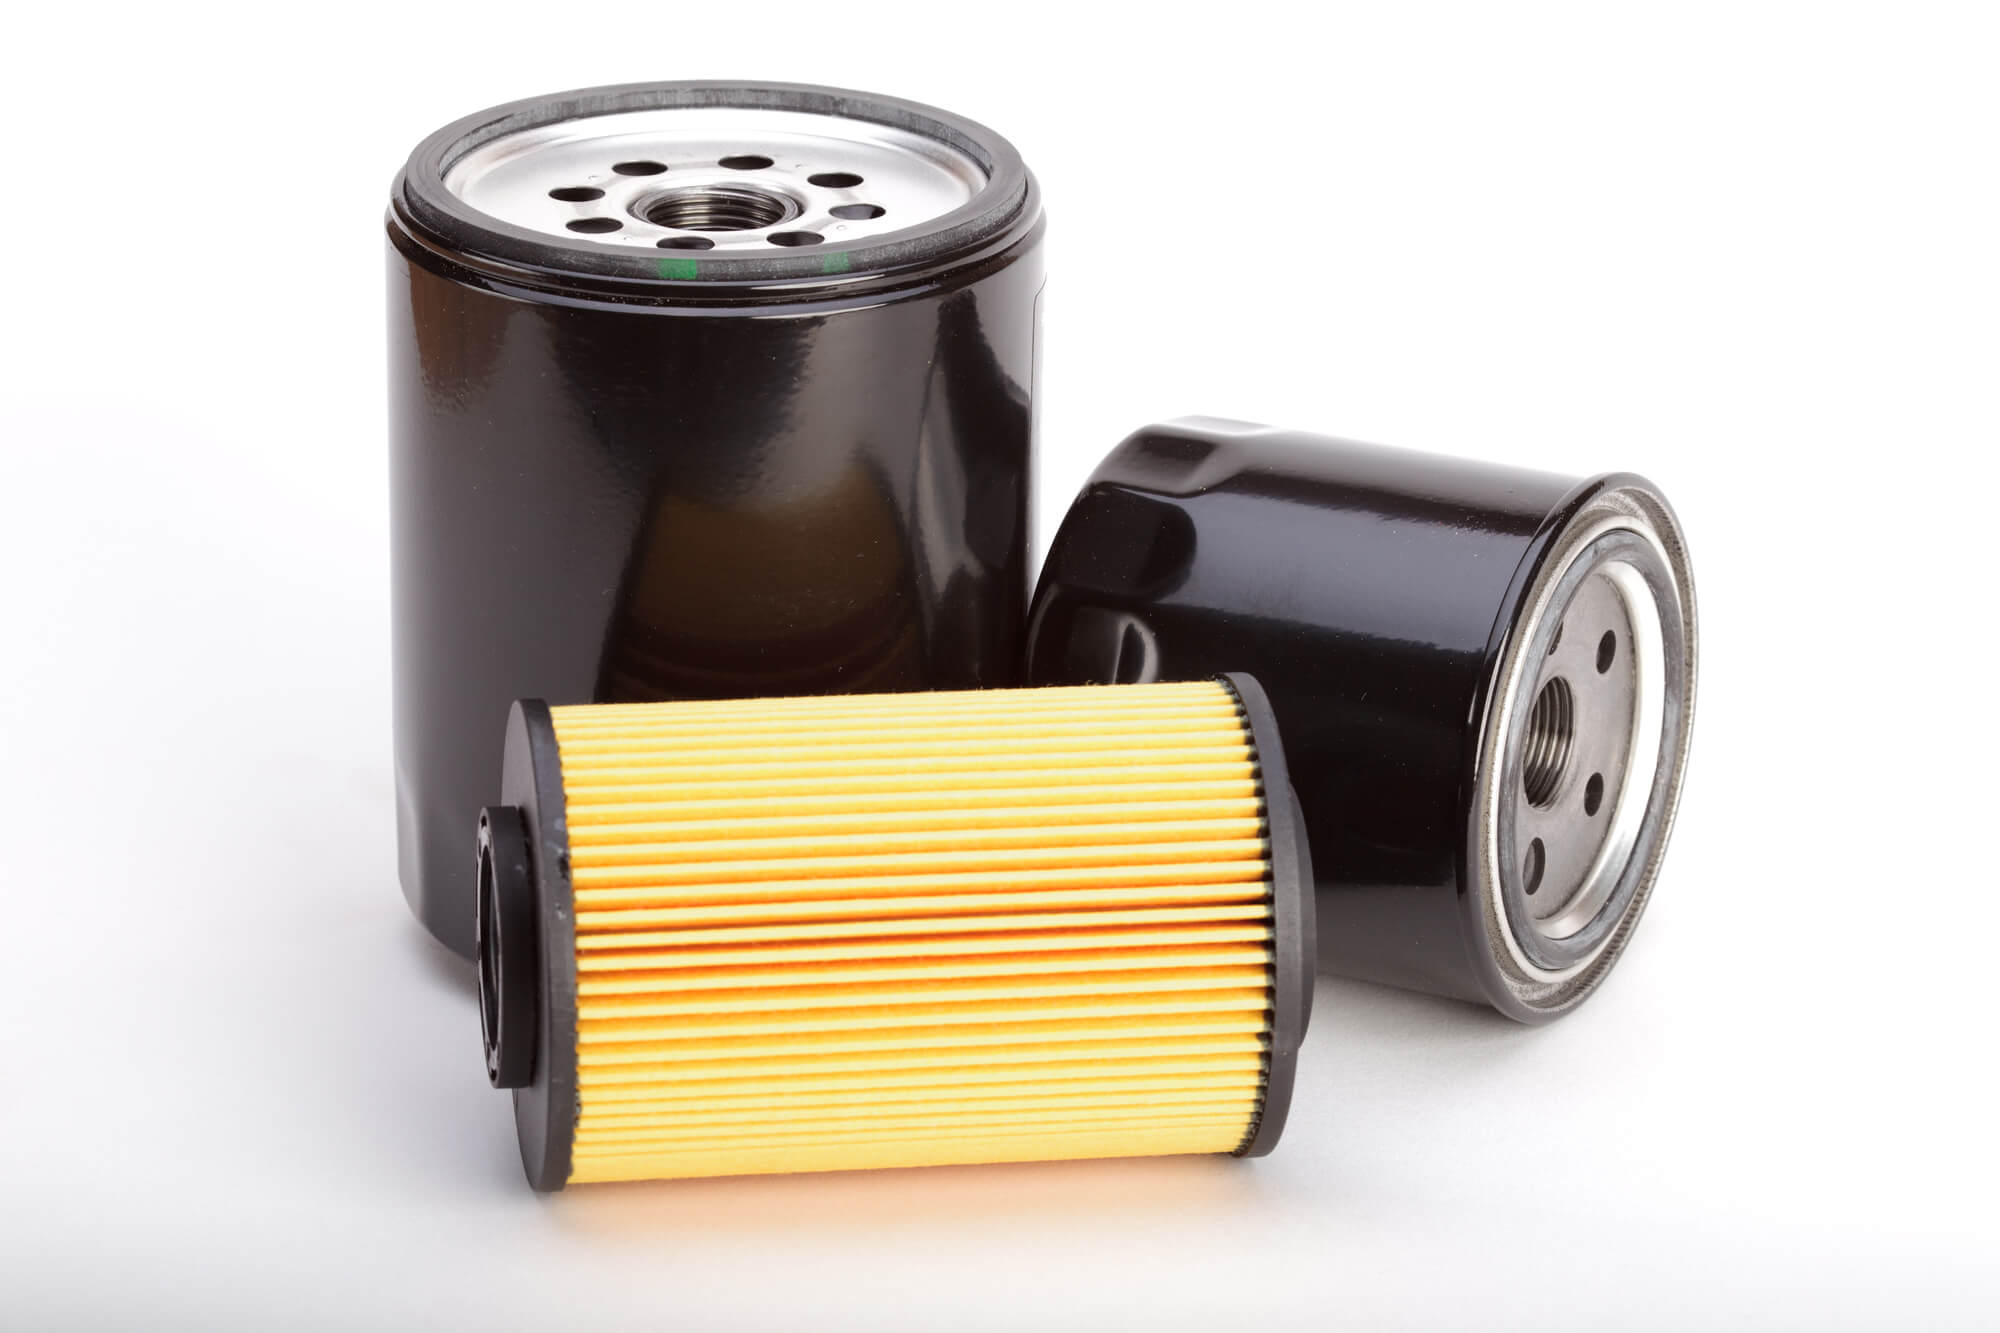 Best Oil Filters For 6.7 Cummins (Review & Buying Guide) in 2020 Best Oil Filter For 5.9 Cummins